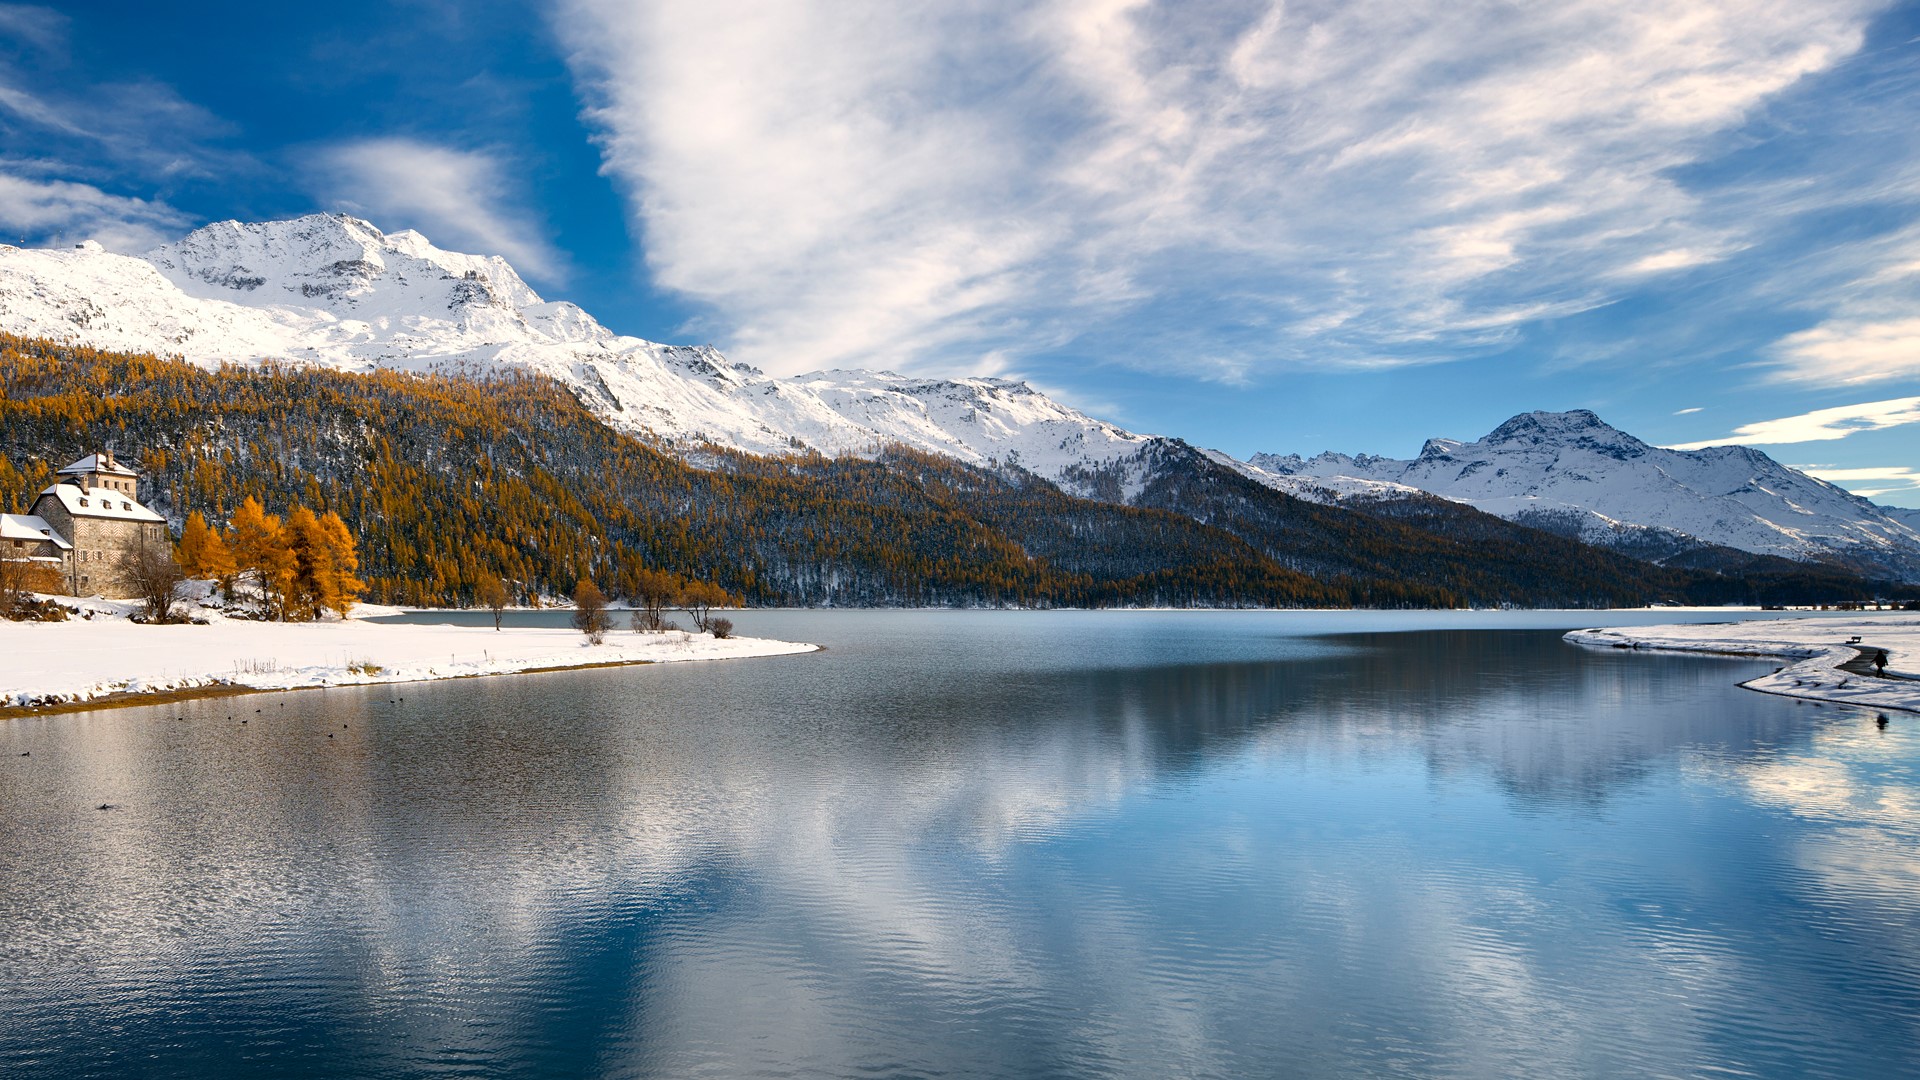 General 1920x1080 nature landscape water ripples snowy mountain clouds Alps Switzerland snowy peak mountains